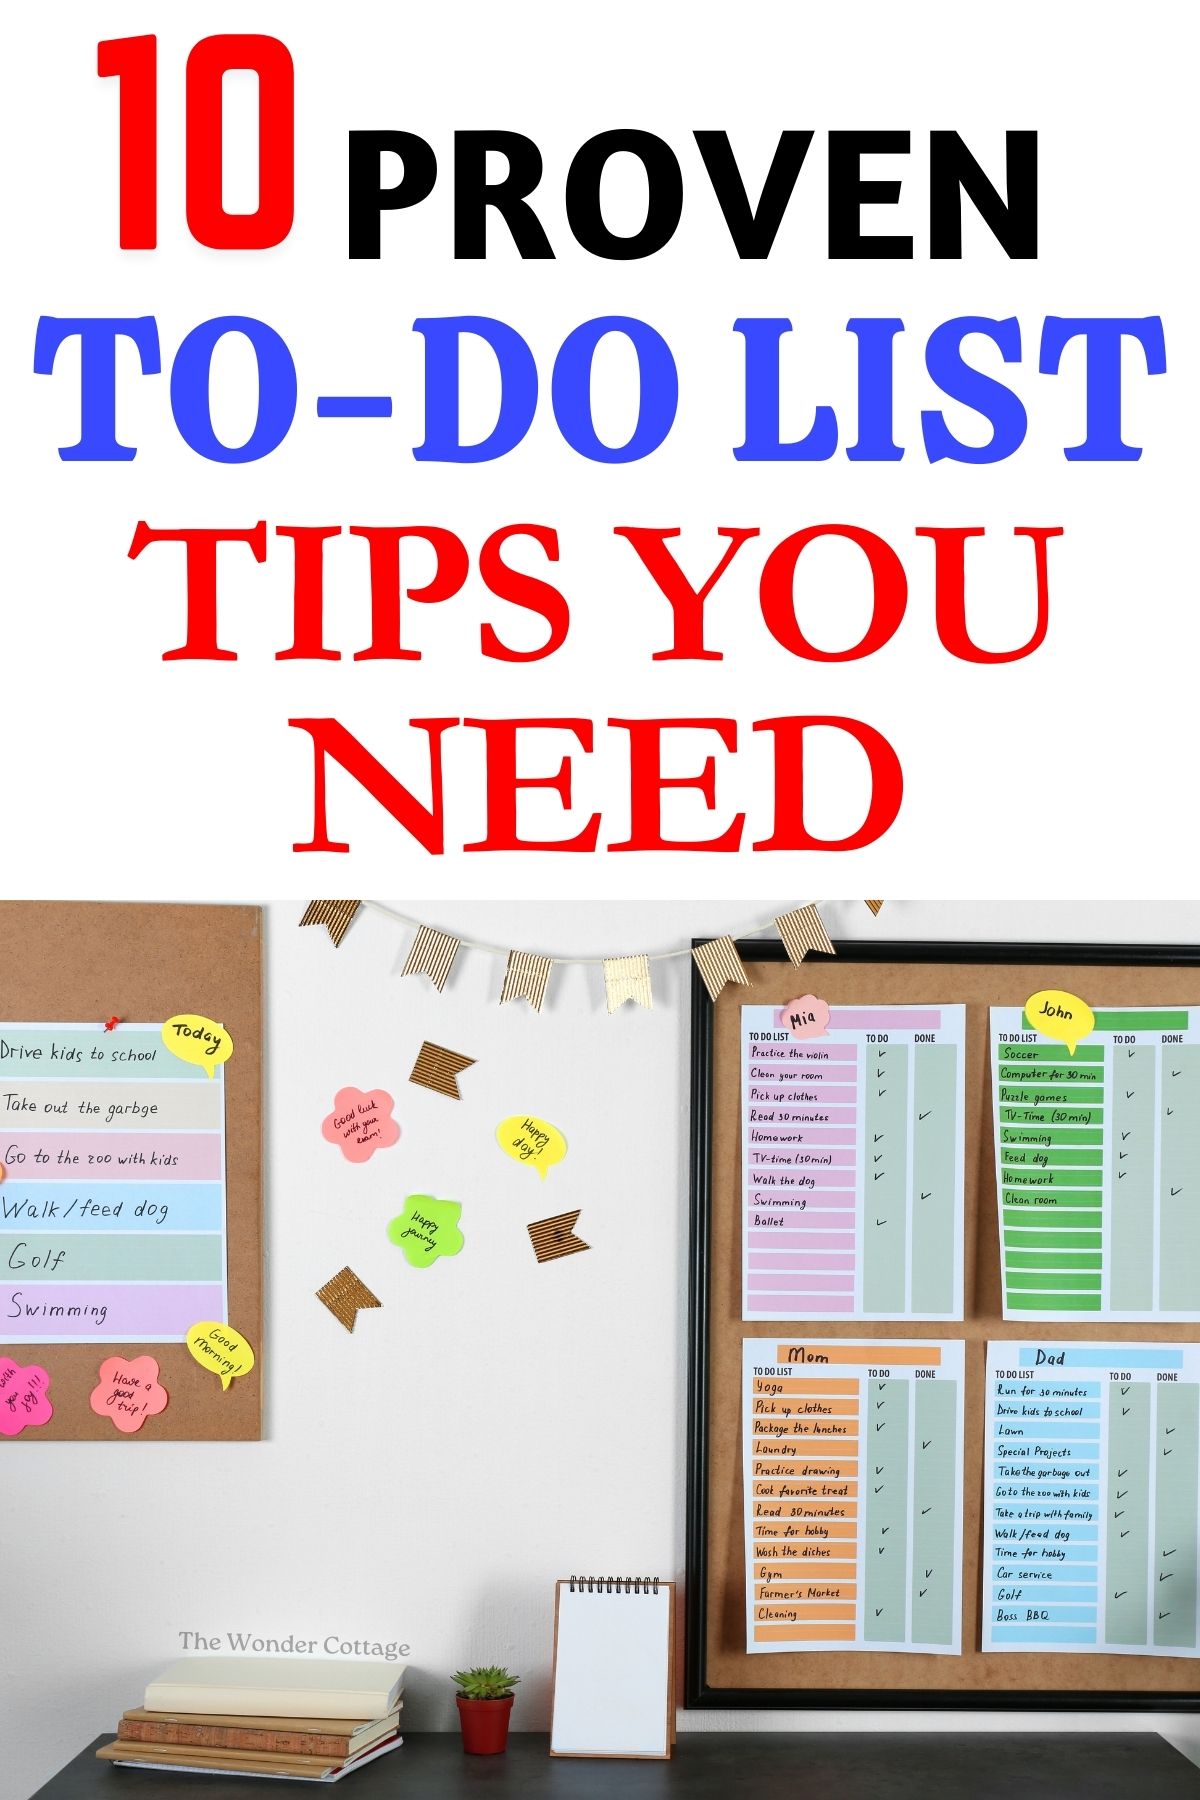 10 Proven To-Do List Tips You Need